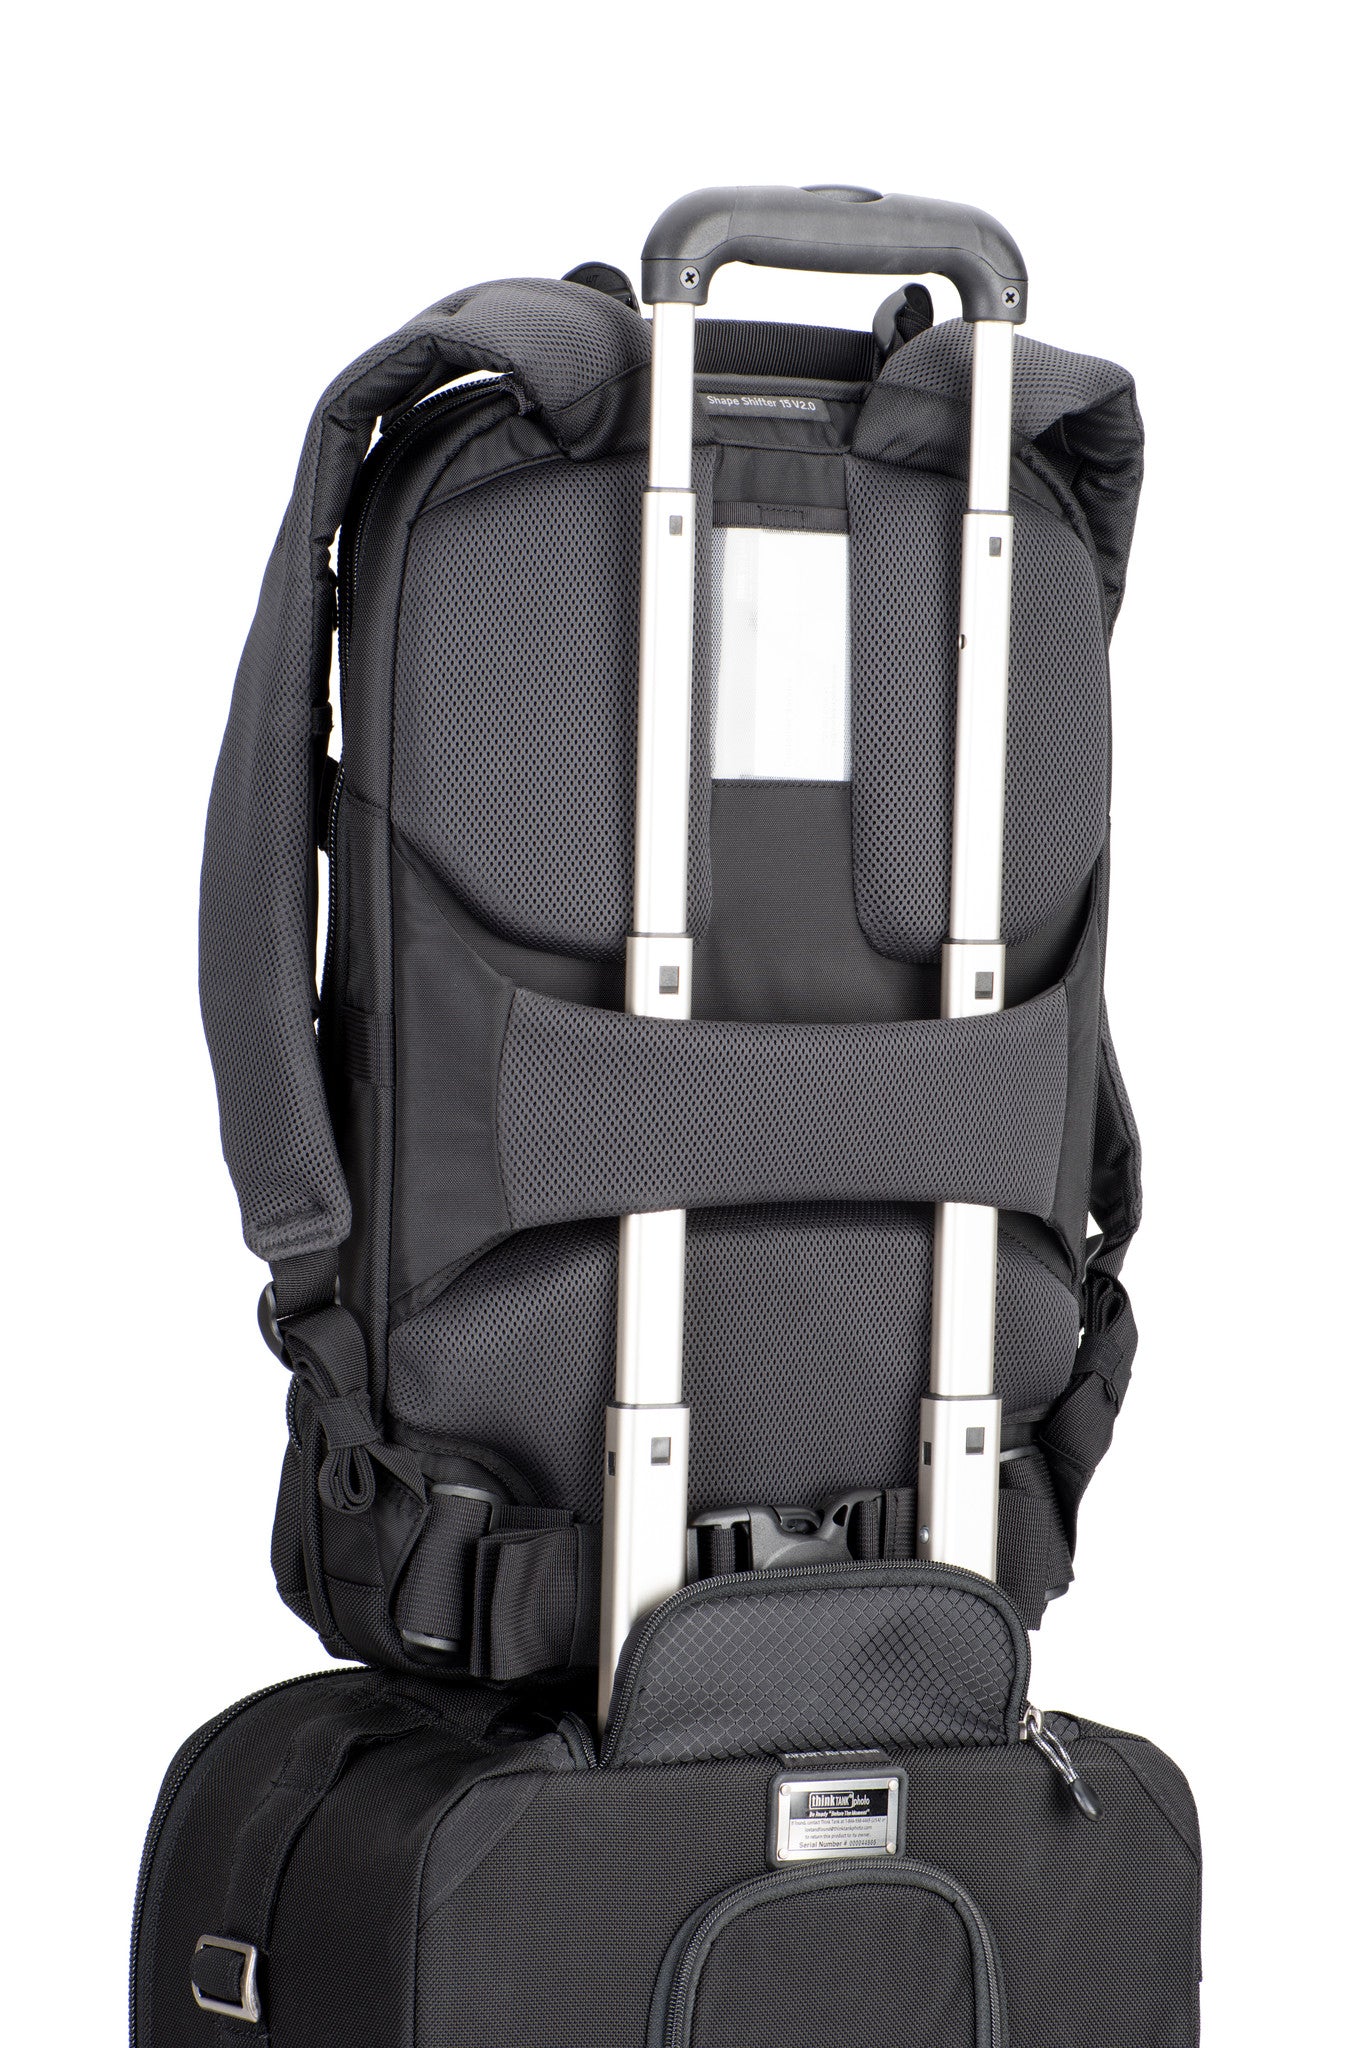 Shape Shifter 15 - Expandable Photography Backpack fits 15